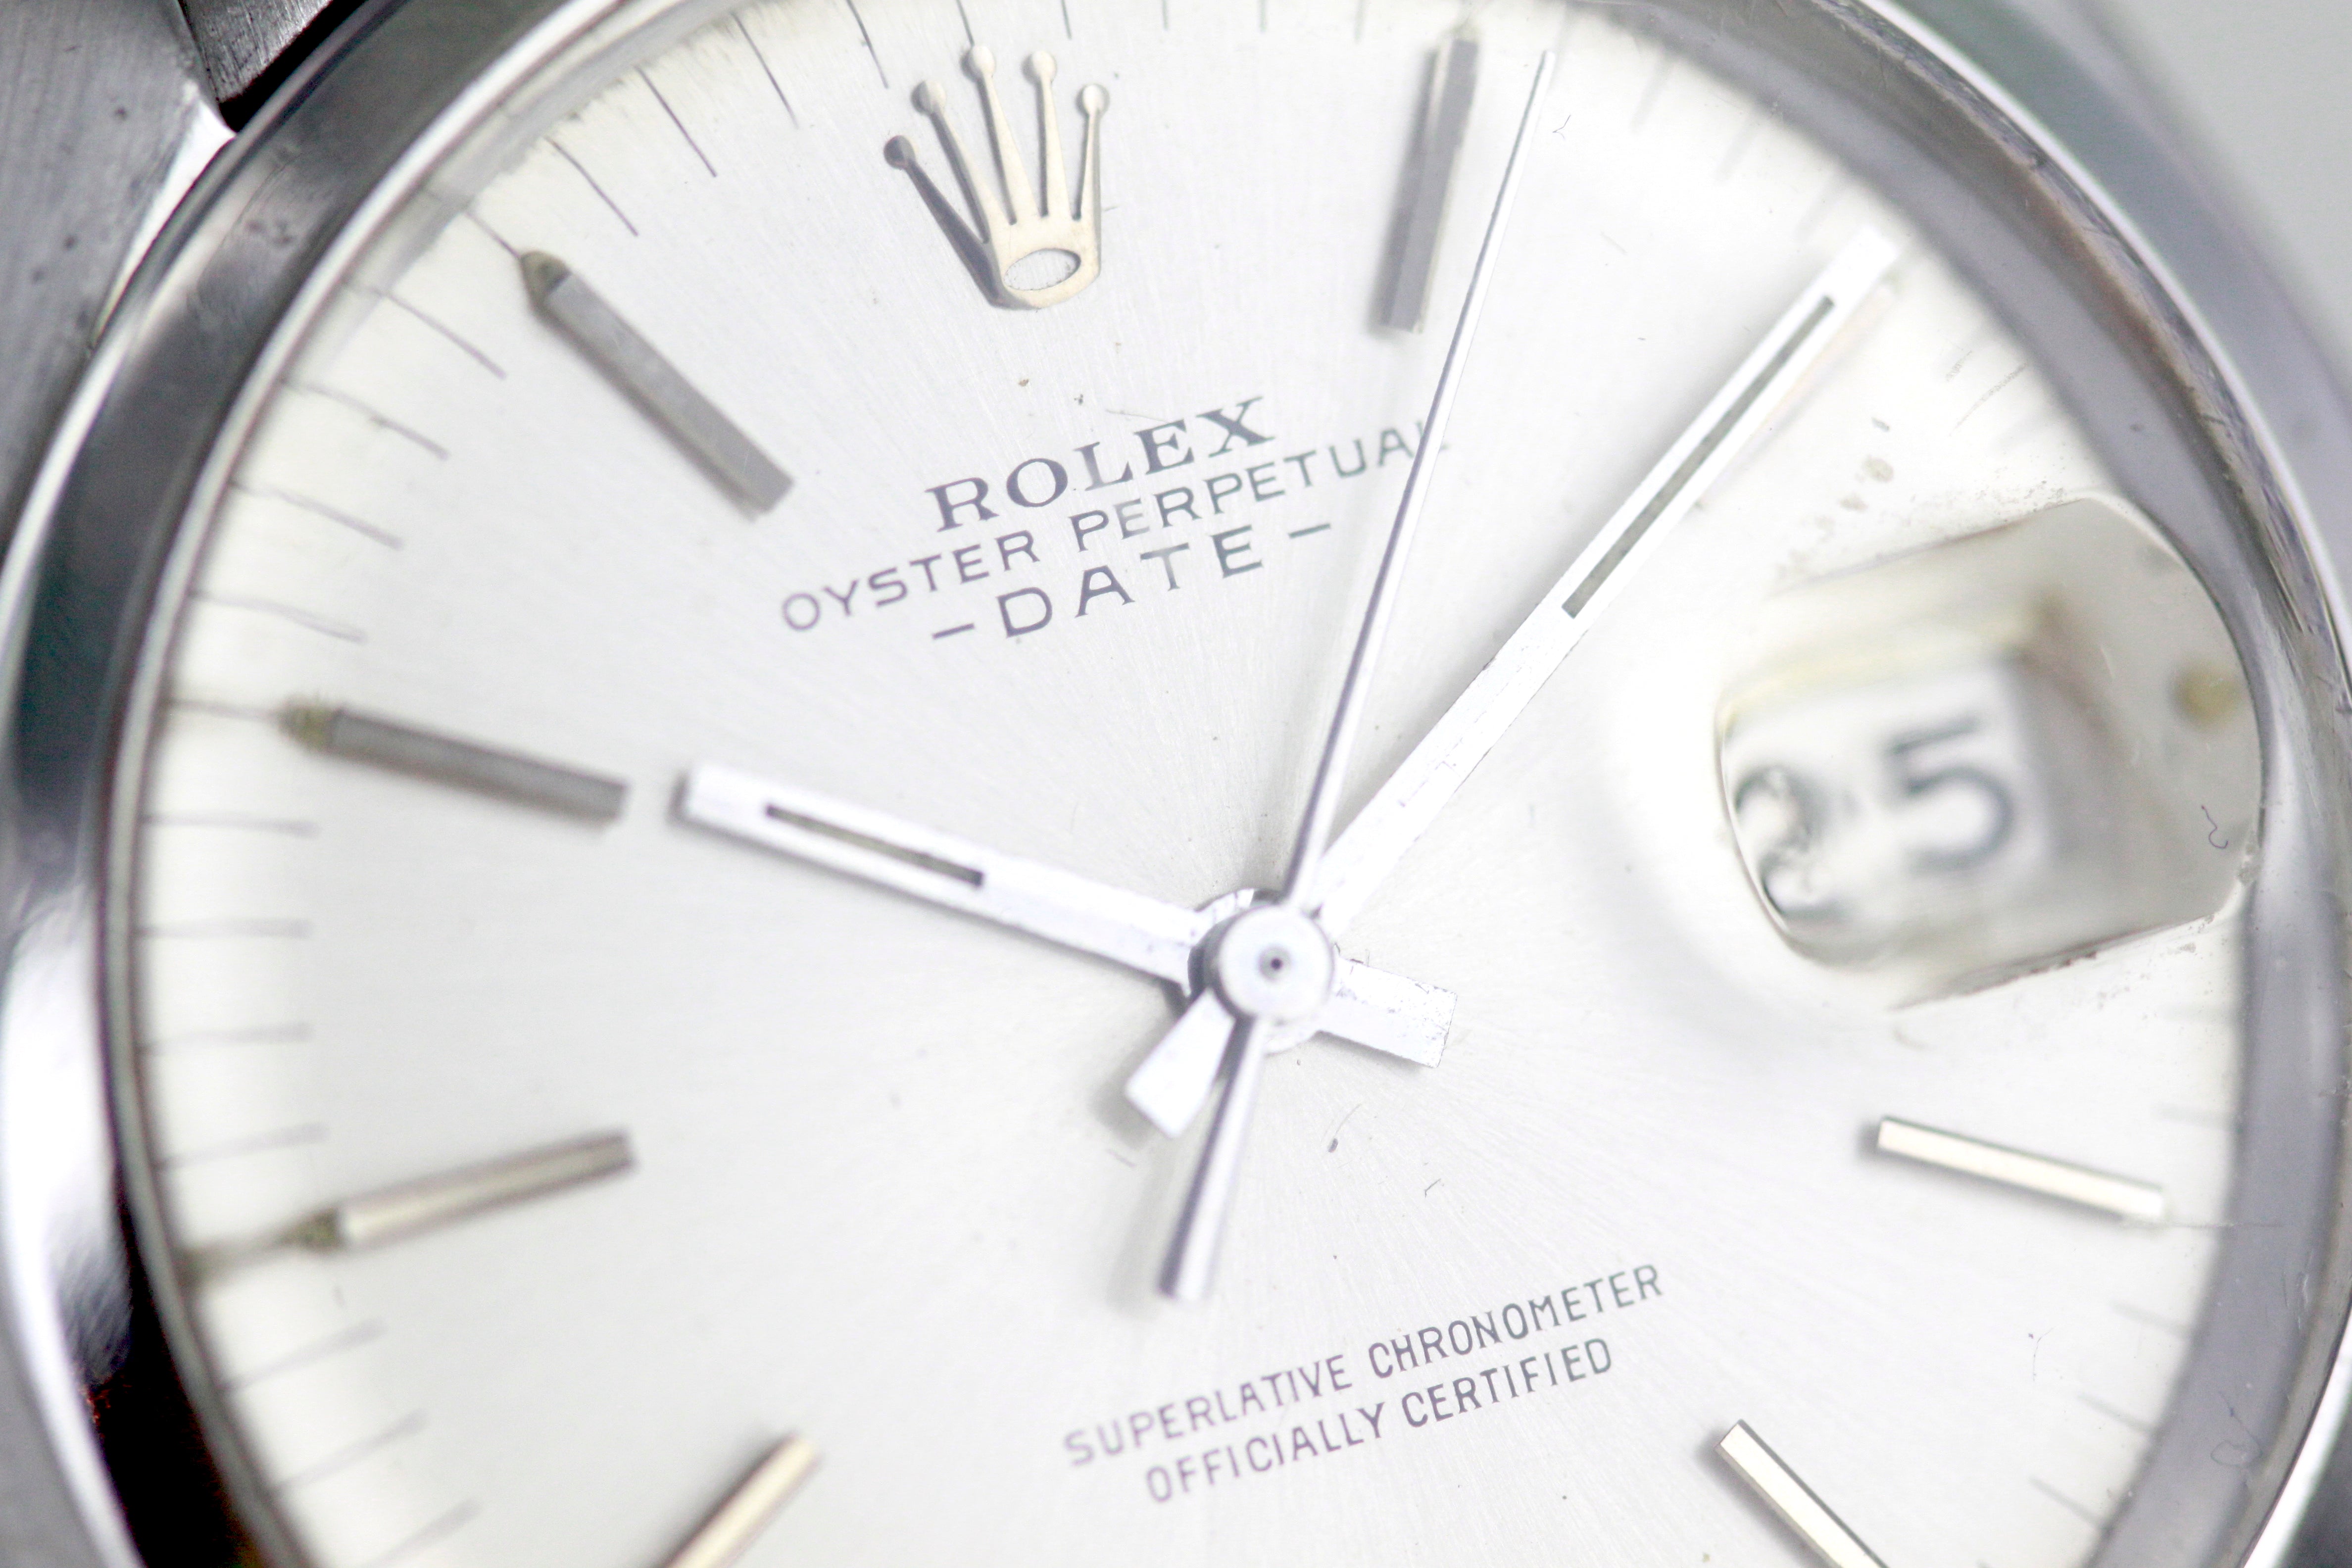 Rolex Date Champagne dial - ref 1500 from 1966